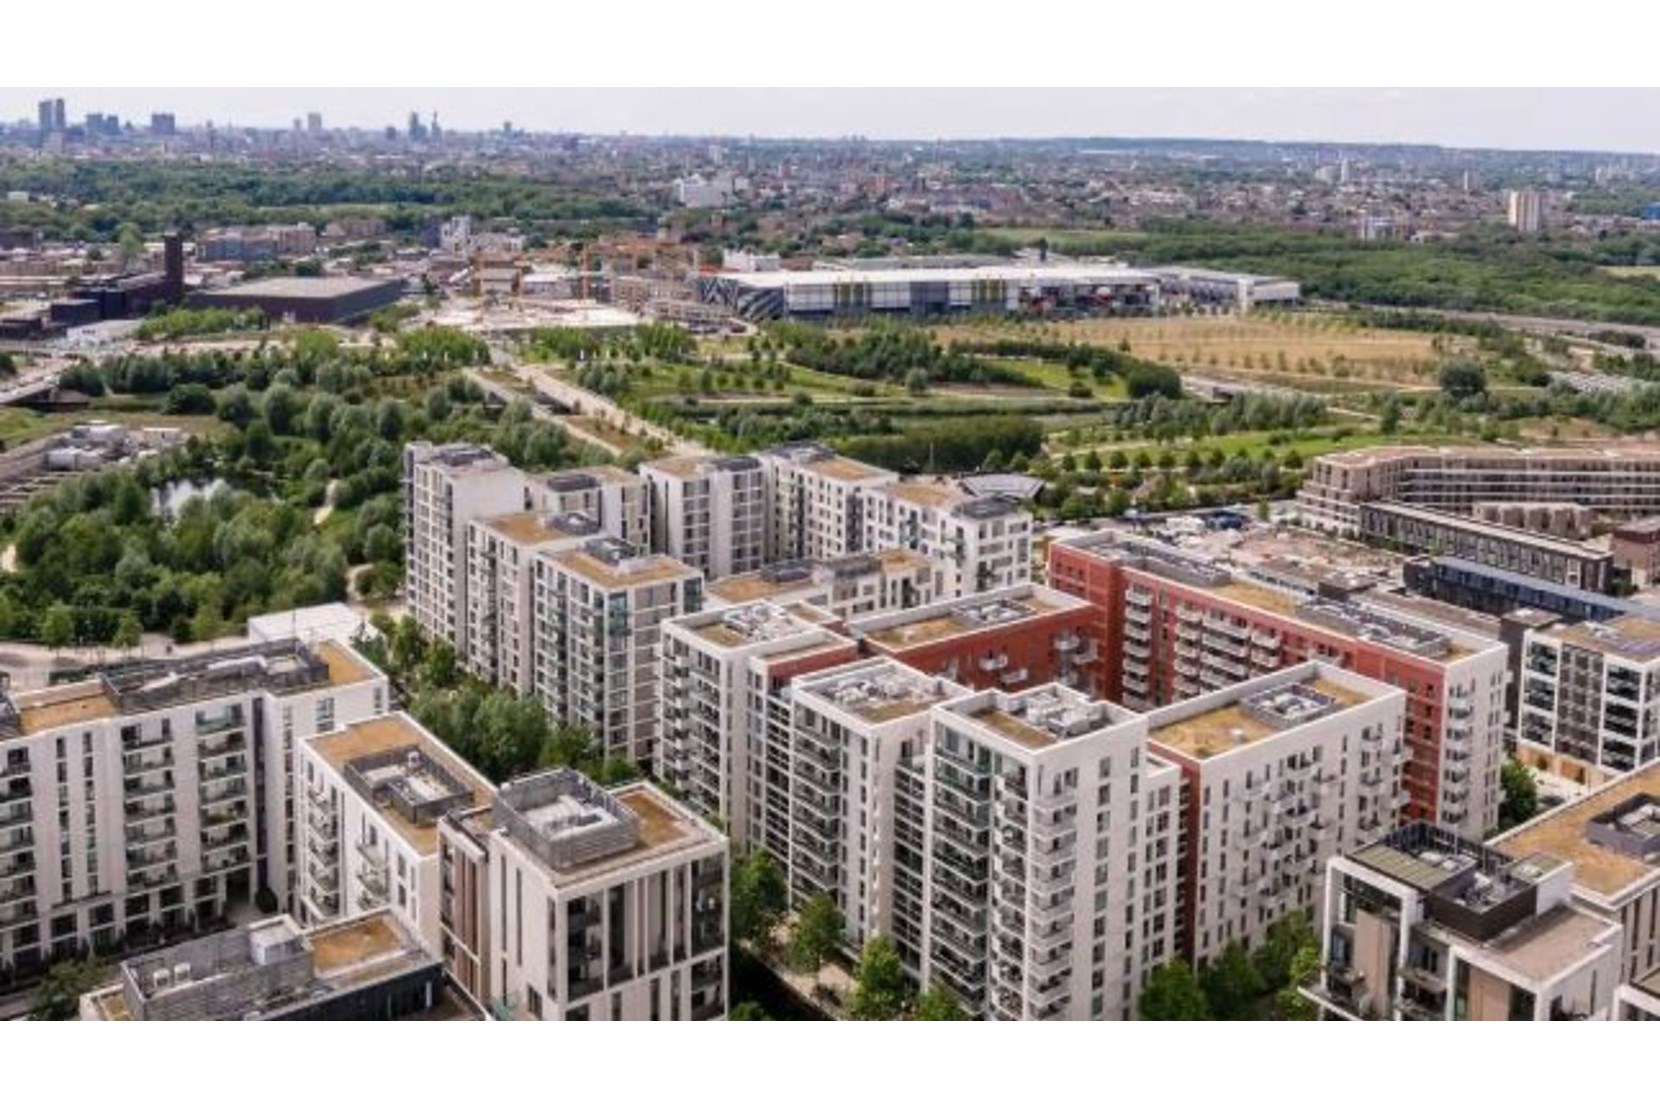 Apartments to Rent by Get Living at East Village, Newham, E20, development panoramic